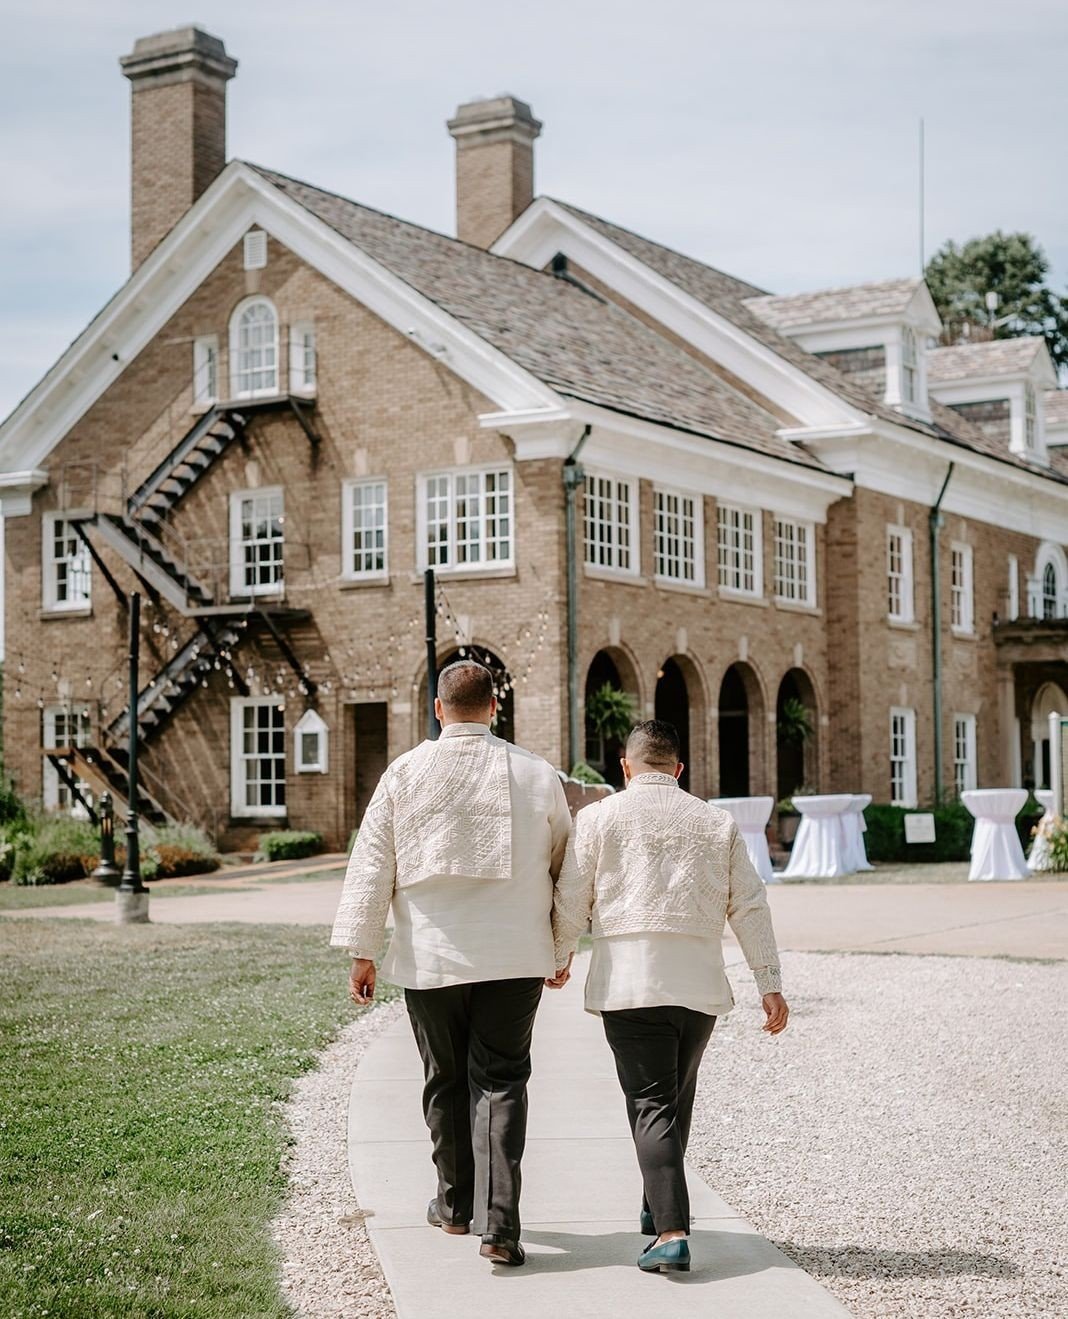 It's no secret, we're proud to be an inclusive venue. No matter who you love, no matter your faith background, where you&rsquo;re from, or the color of your skin - you are welcomed here. We are honored to celebrate with you.⁠
⁠
#weddingvenue #michiga